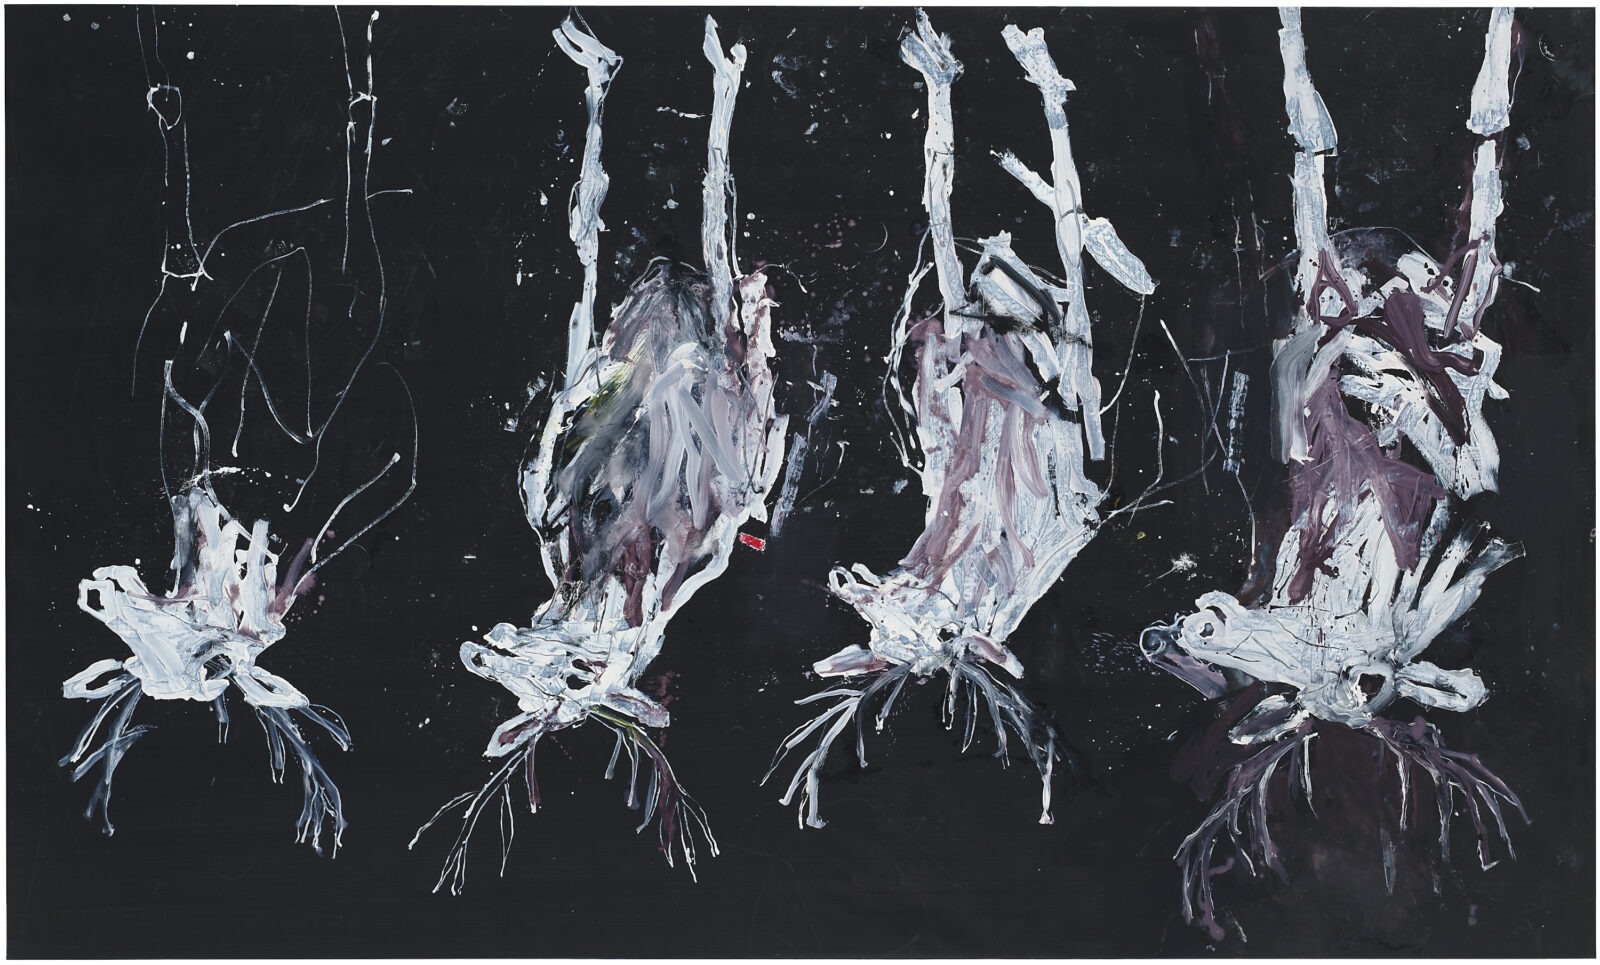 GEORG BASELITZ
The Painter in His Bed, 2022
Oil, dispersion adhesive, and plastic on canvas
118 1/8 x 196 7/8 inches (300 x 500 cm)
© Georg Baselitz 2023
Photo: Jochen Littkemann, Berlin
Courtesy the artist and Gagosian